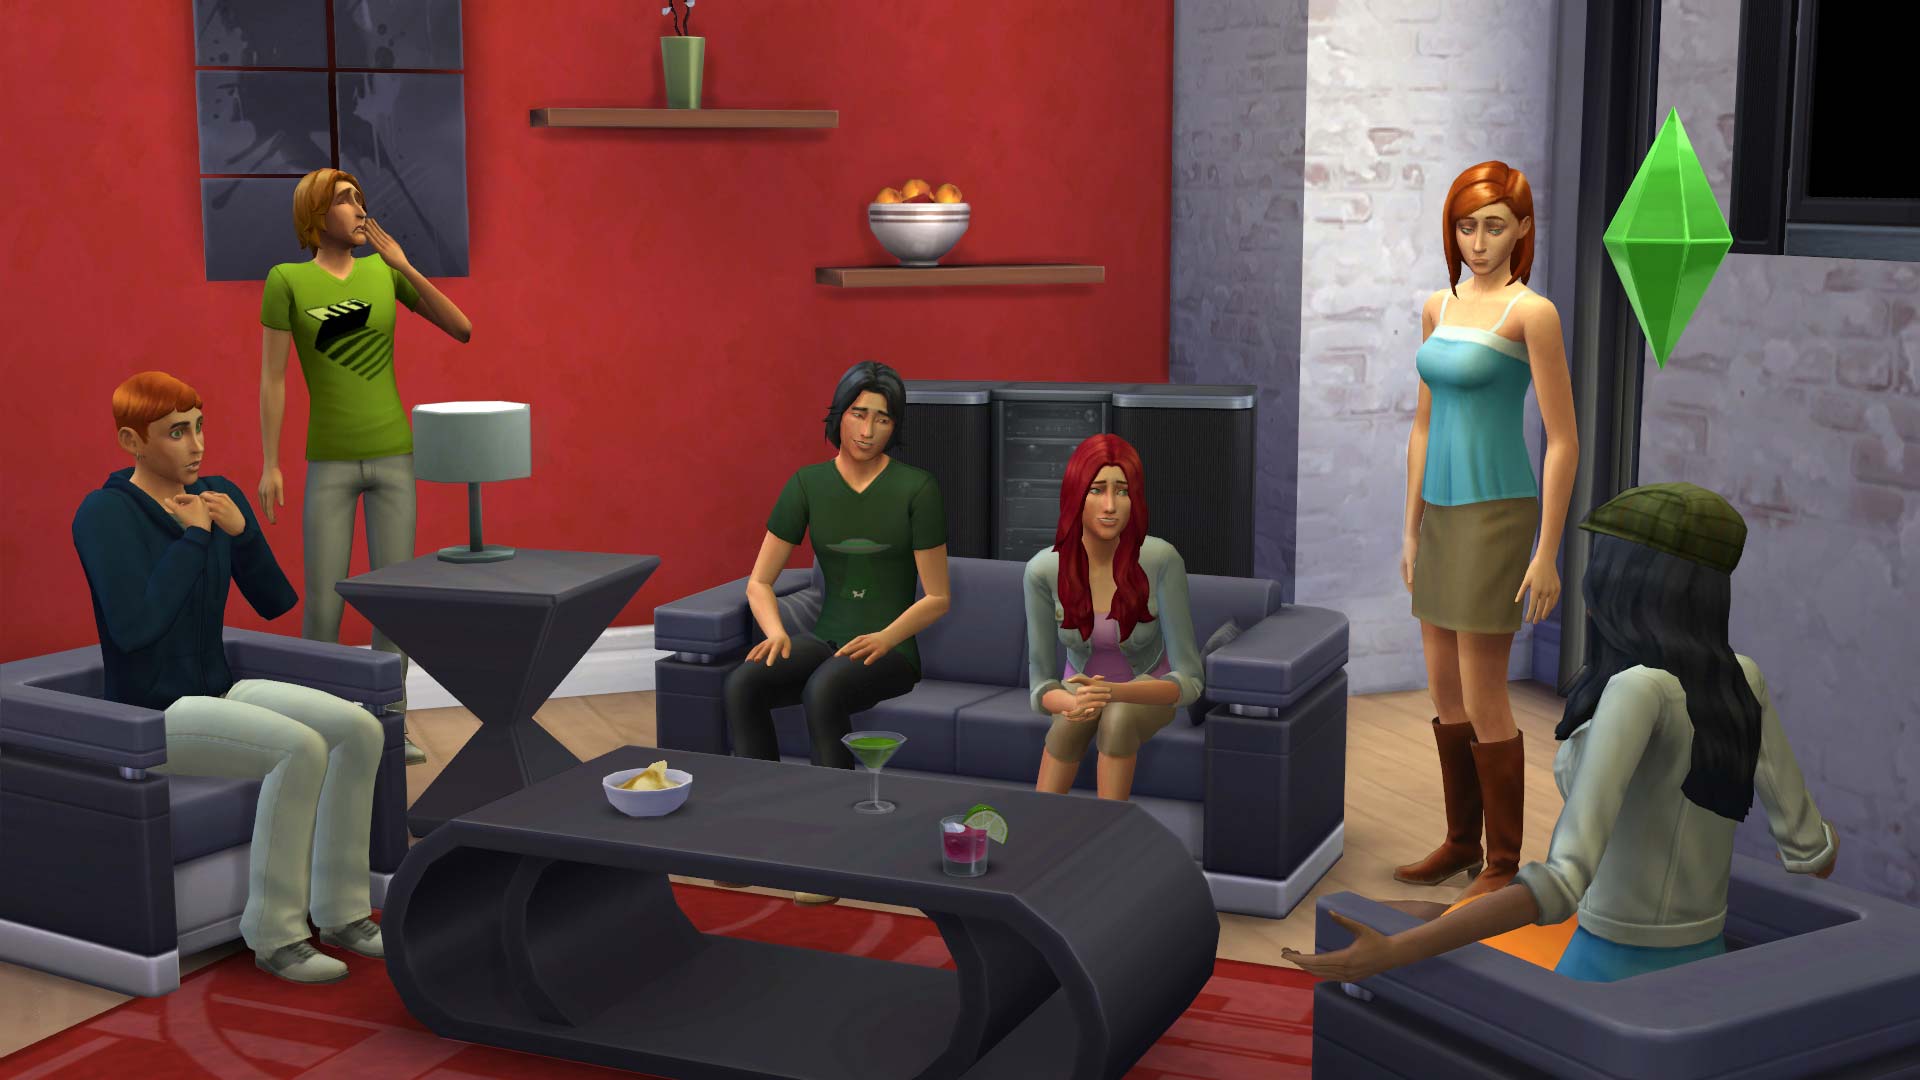 The Sims 4 Trailer Shows Off Create A Sim Feature